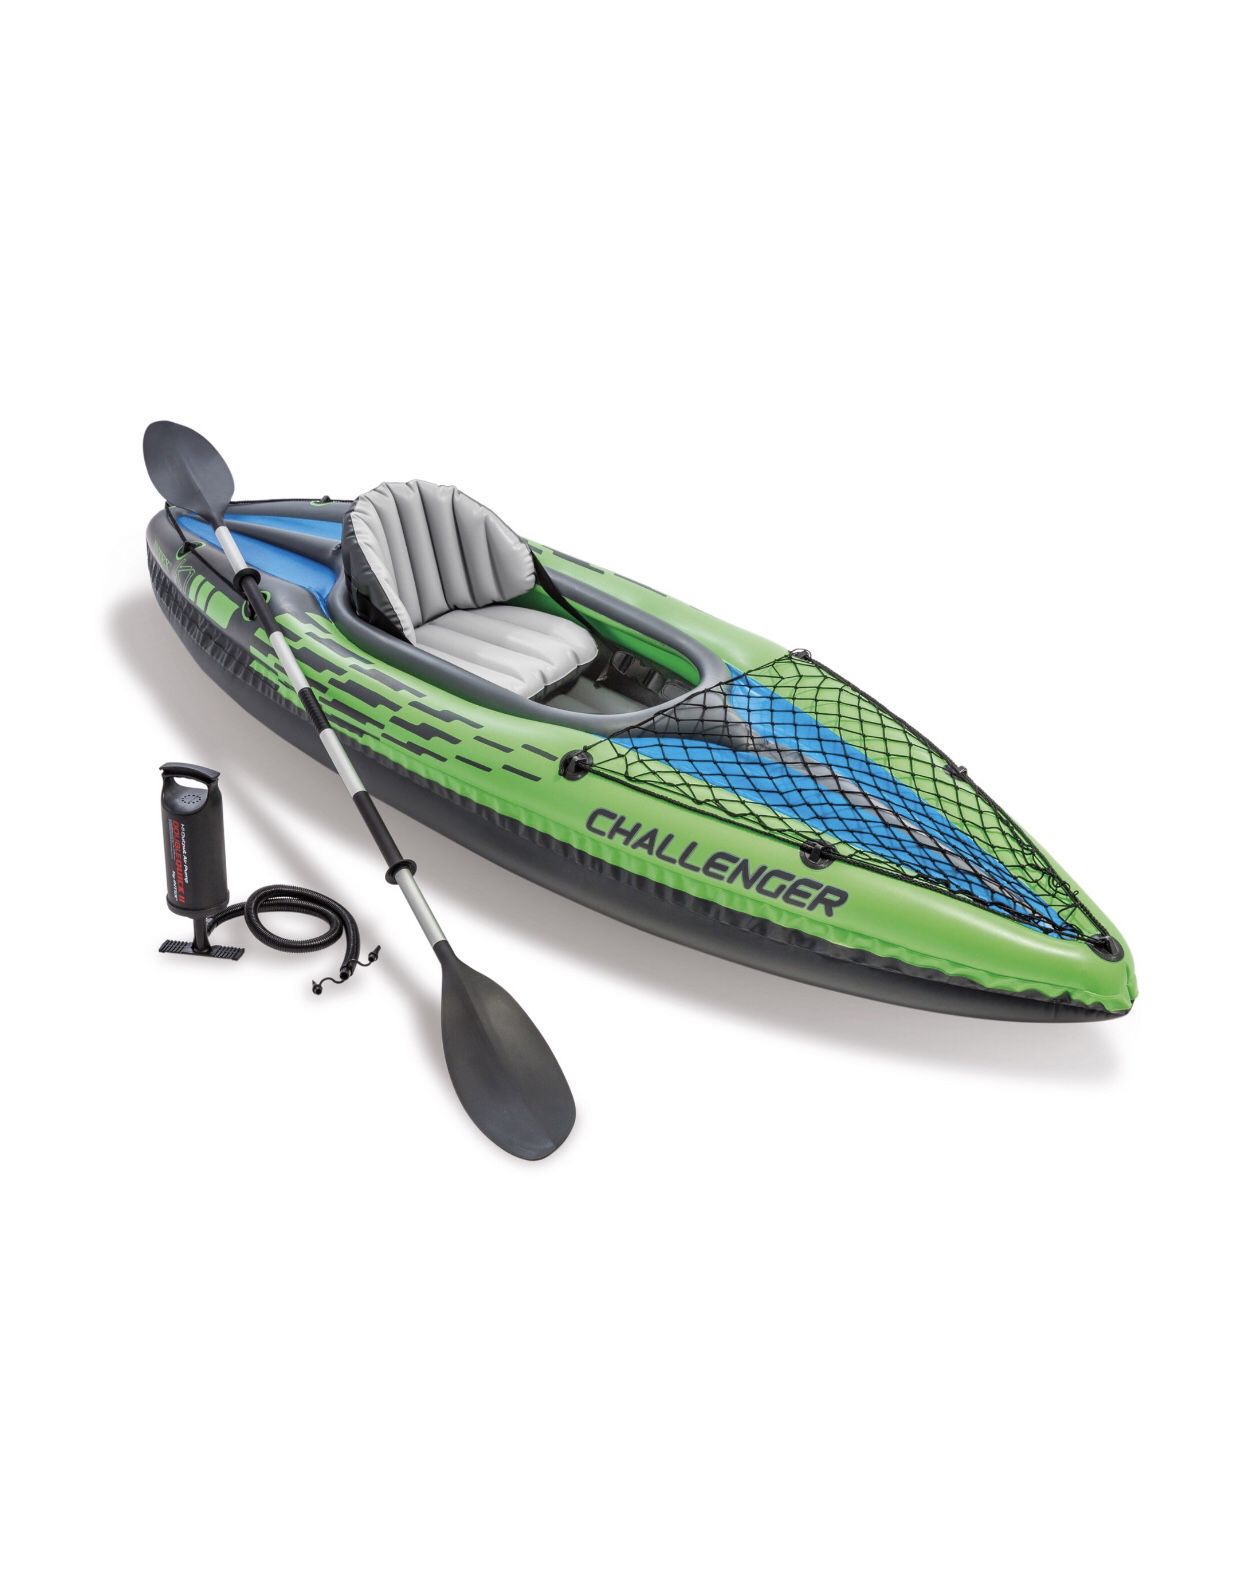 Intex Challenger K1 Inflatable Kayak with Oar and Hand Pump